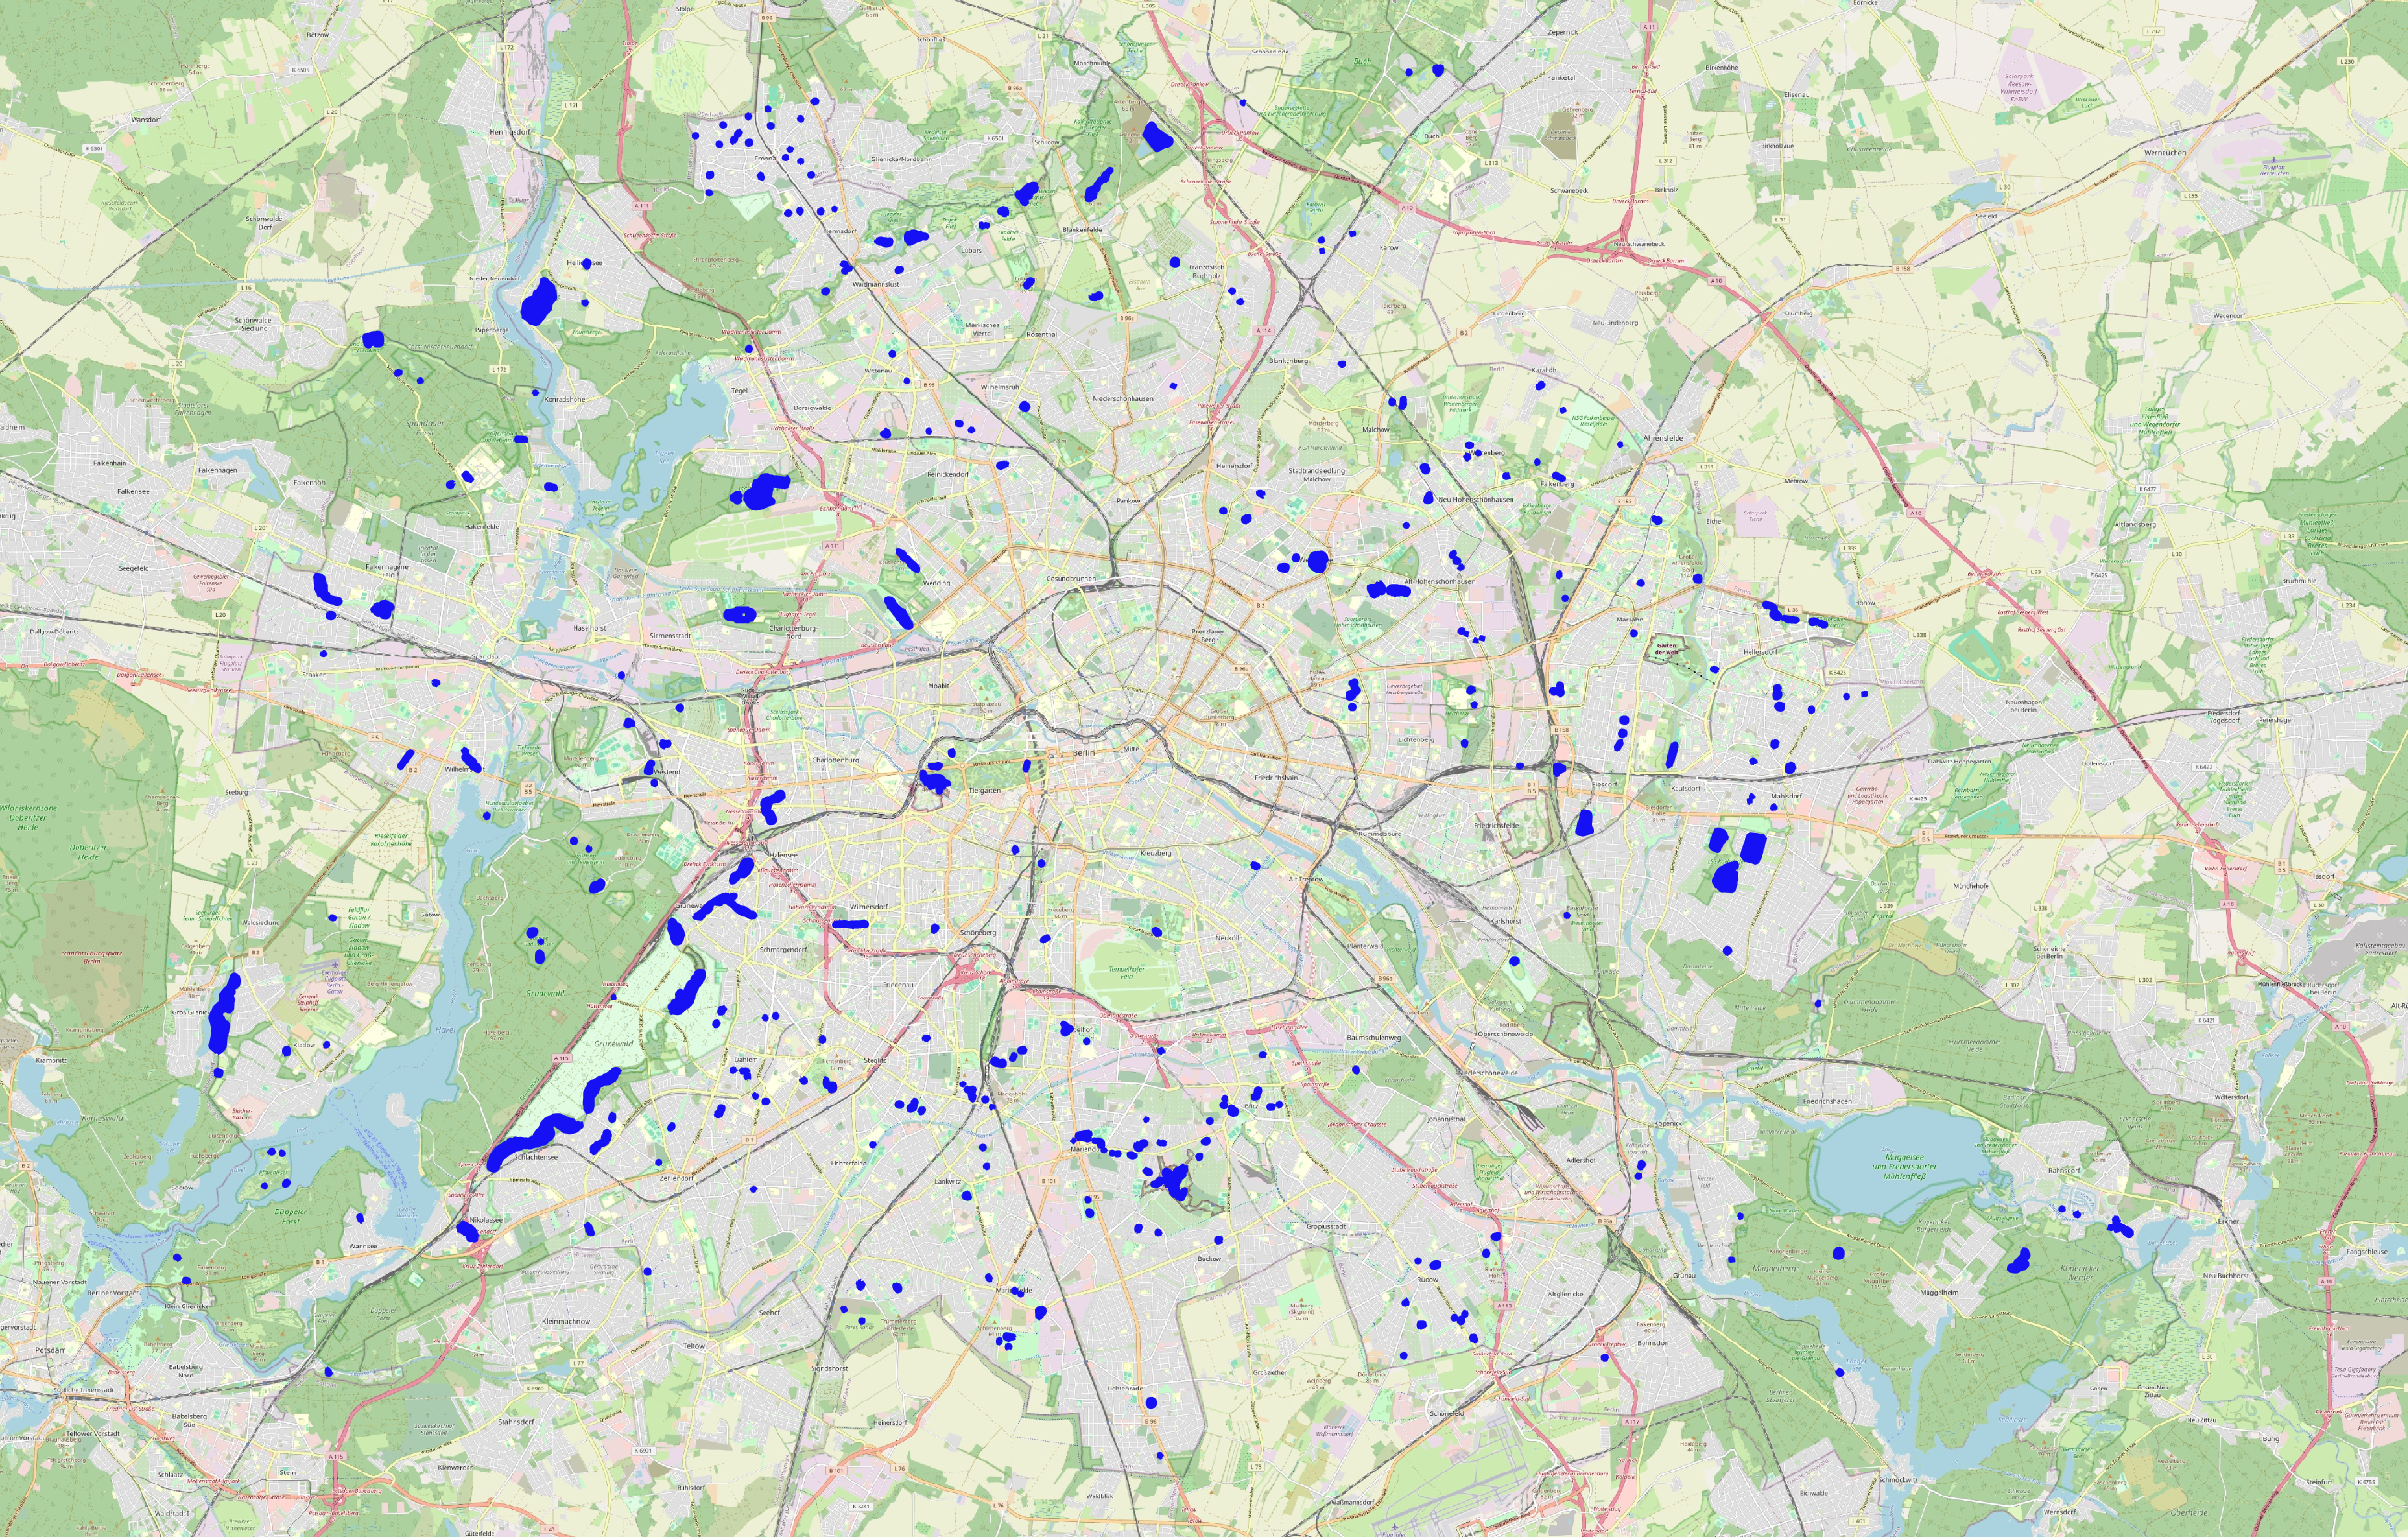 Distribution of lakes of less than 50 ha in the city of Berlin. Image generated with Open-Streetmap. The lakes are shown larger than their actual size in order to be displayed on the map.